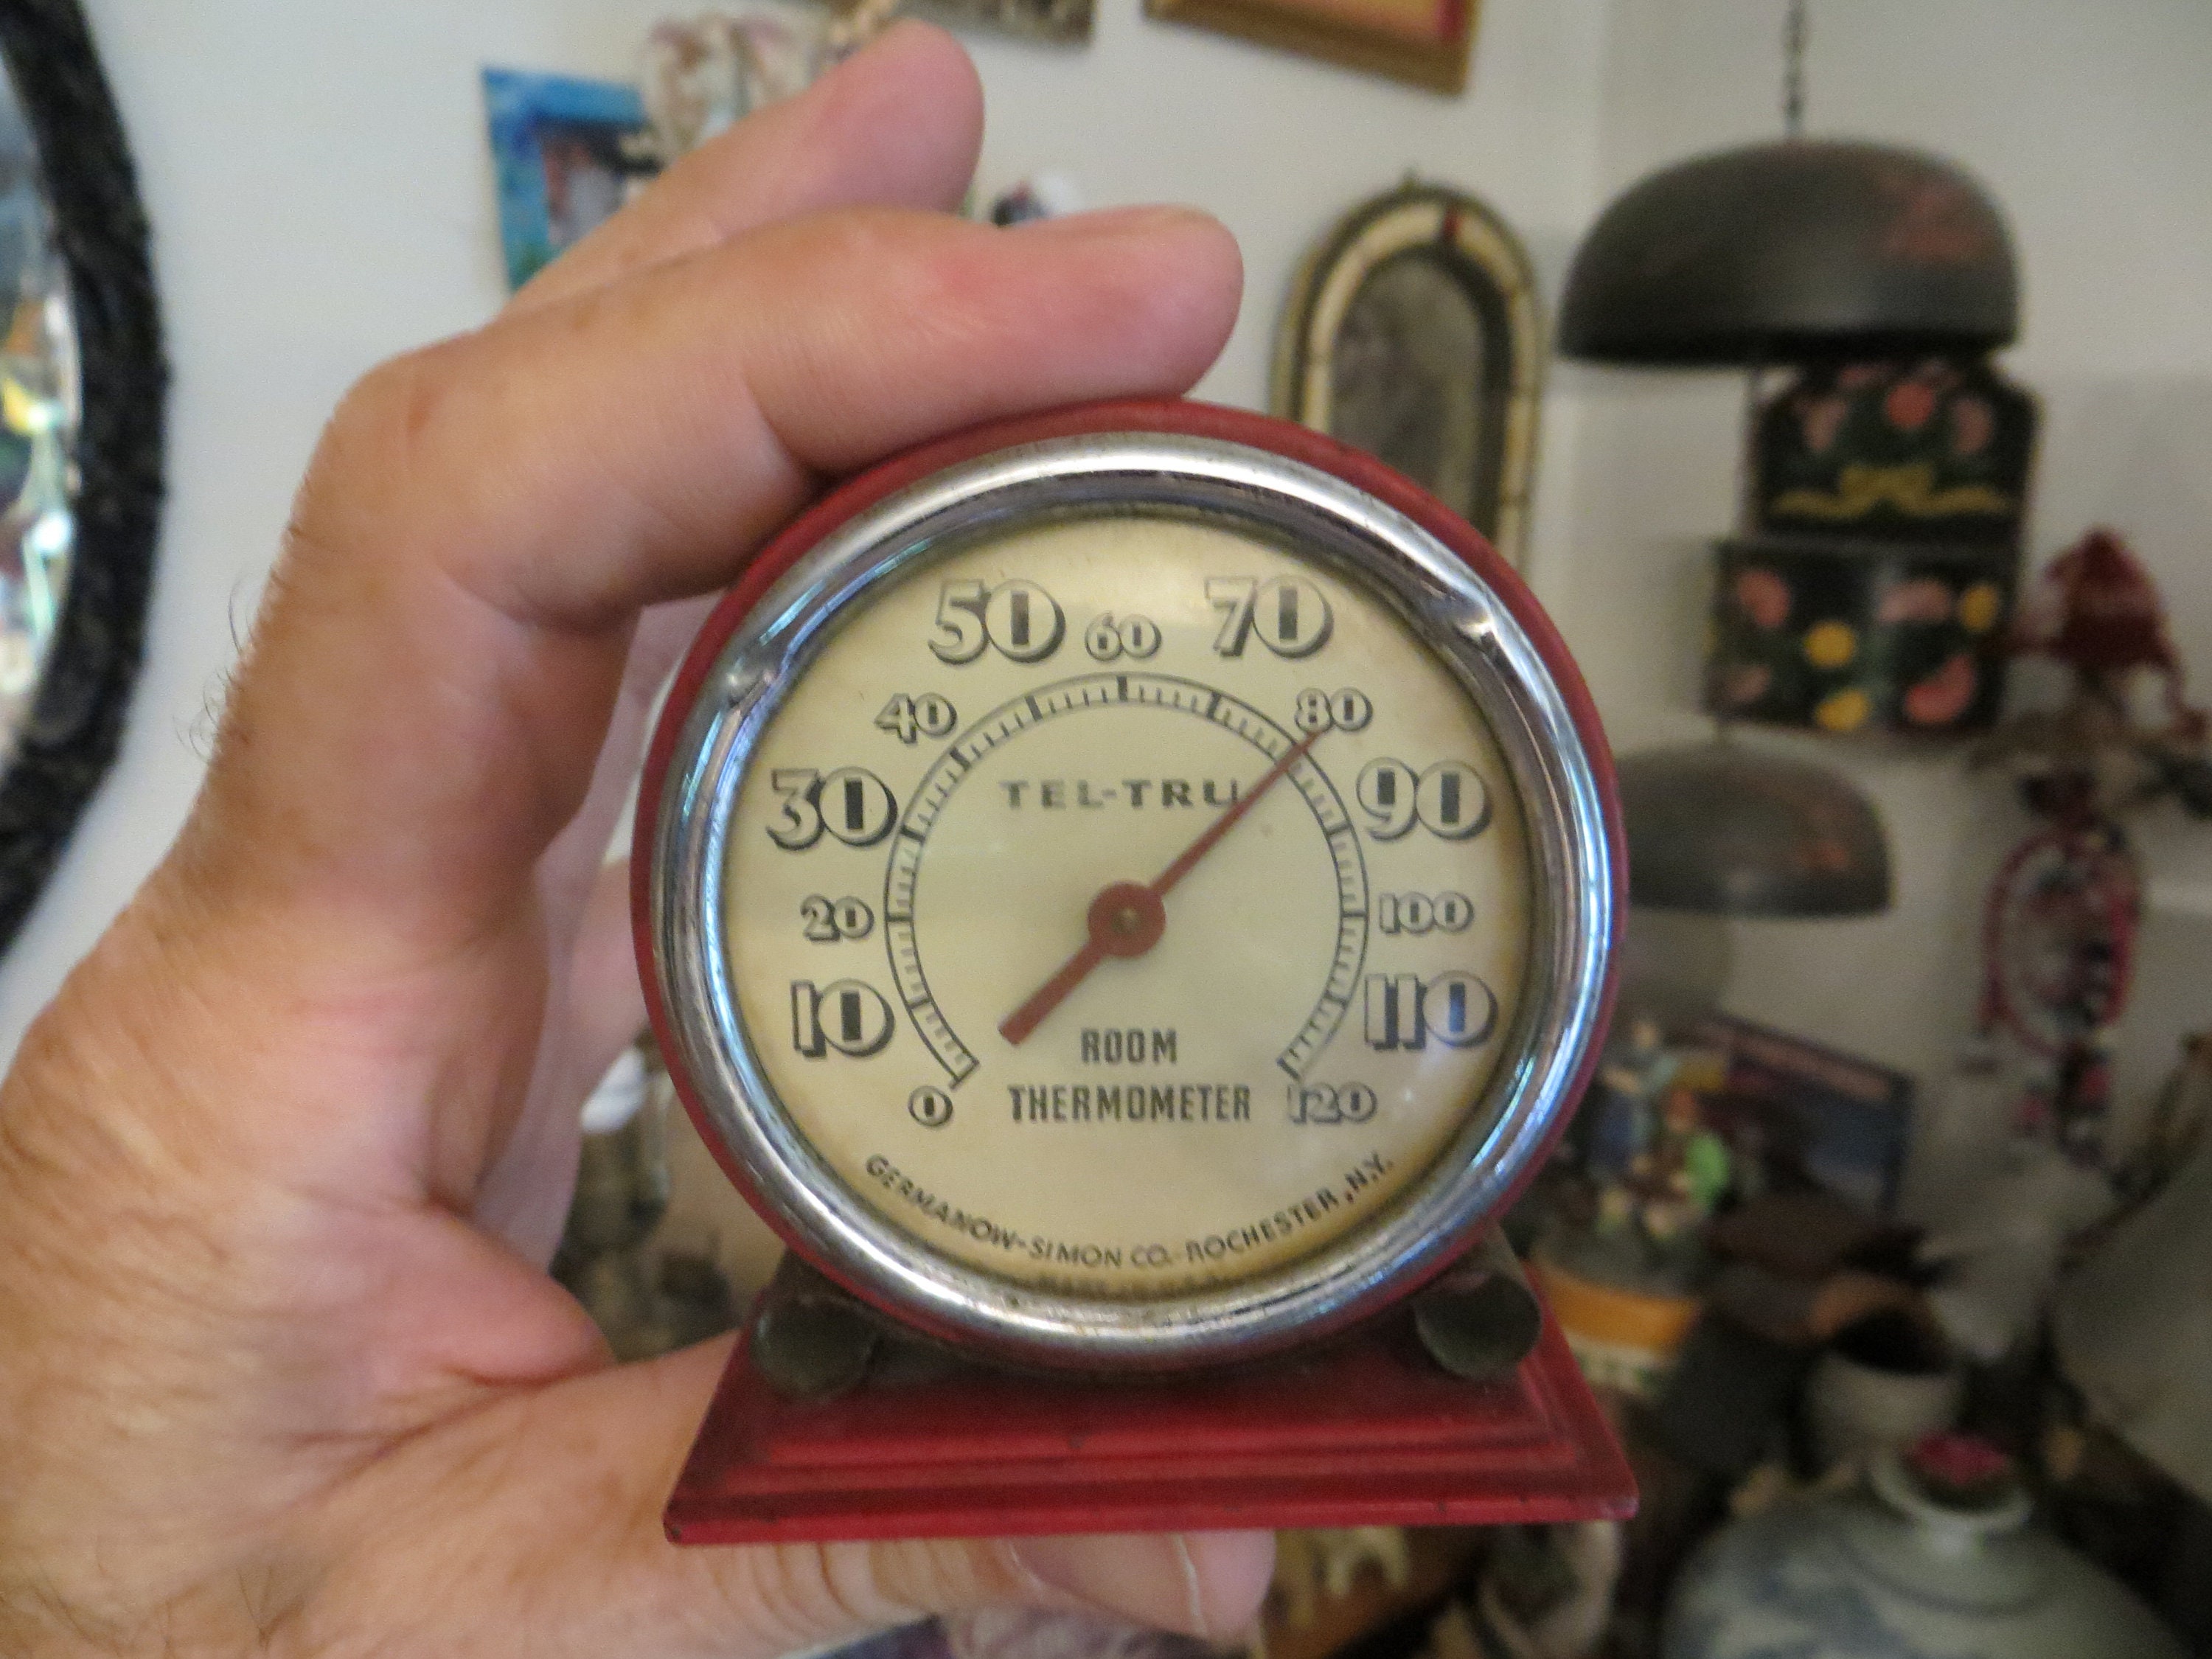 Vintage TEL-TRU Room Thermometer, Germanow Simon Co Rochester NY, Vintage -   Finland